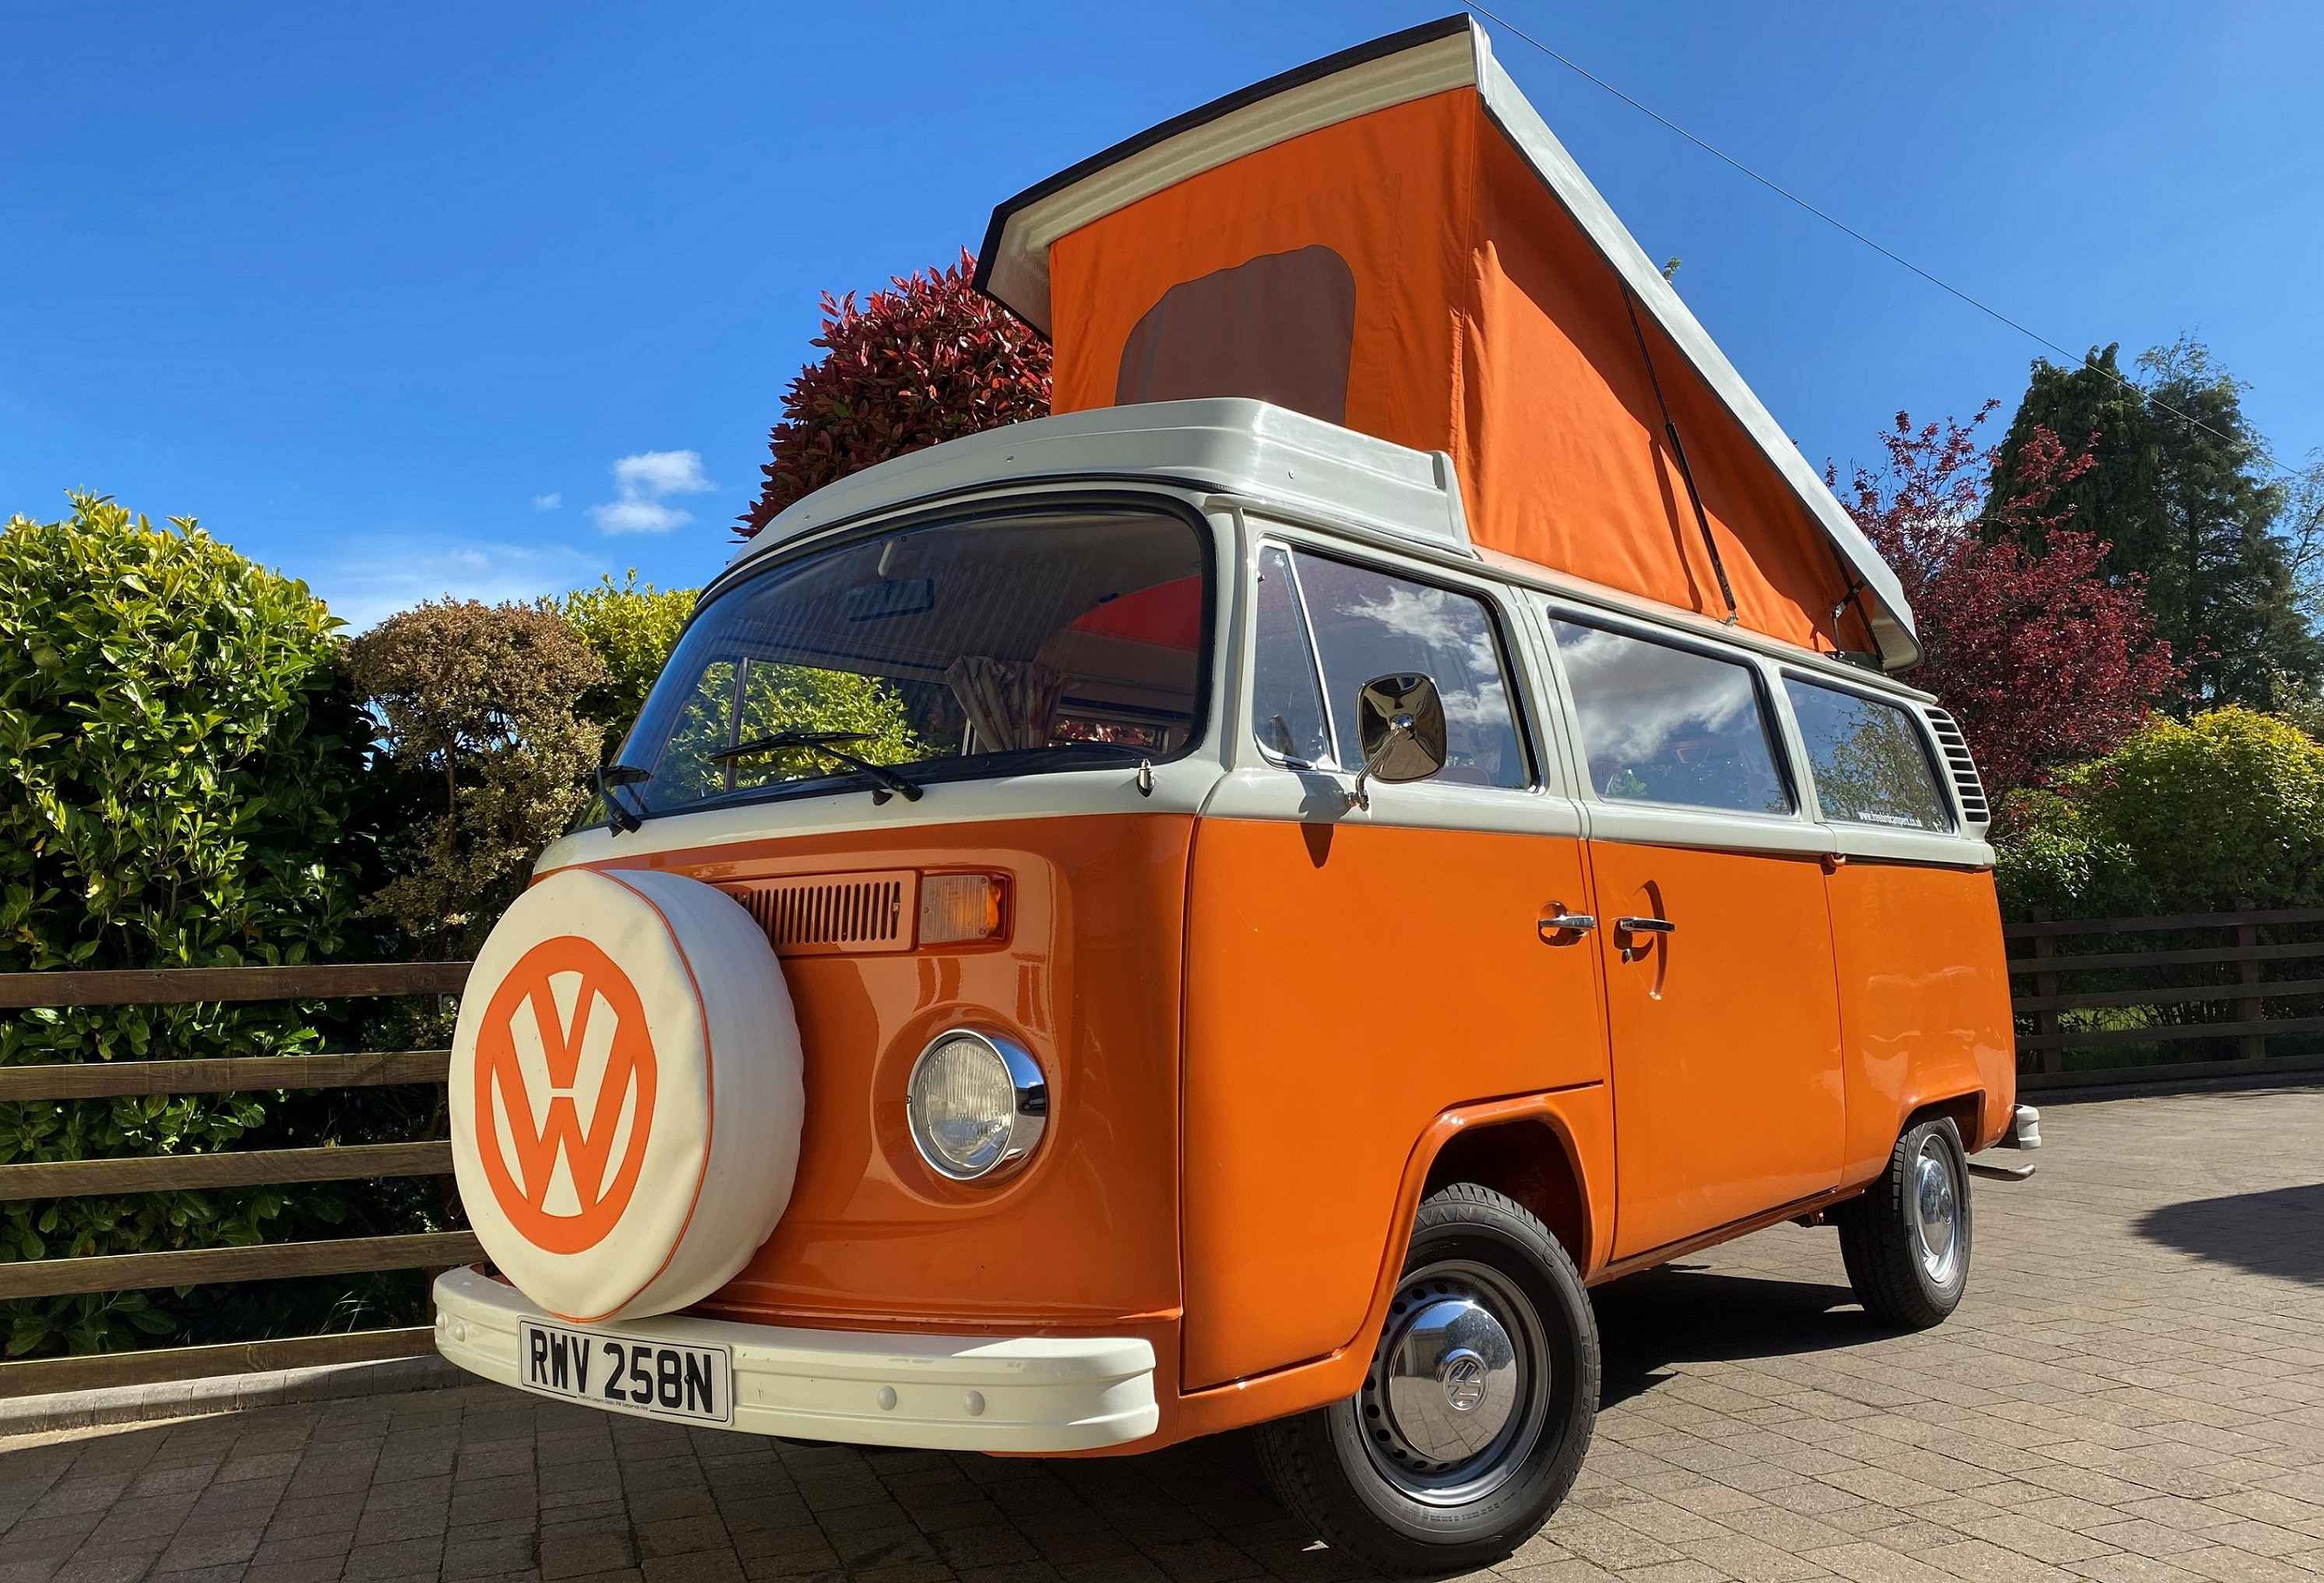 A VW T2 Classic Campervan called Funky-Bob and VW Campervan Funky Bob for hire in Devon for hire in Colyton, England